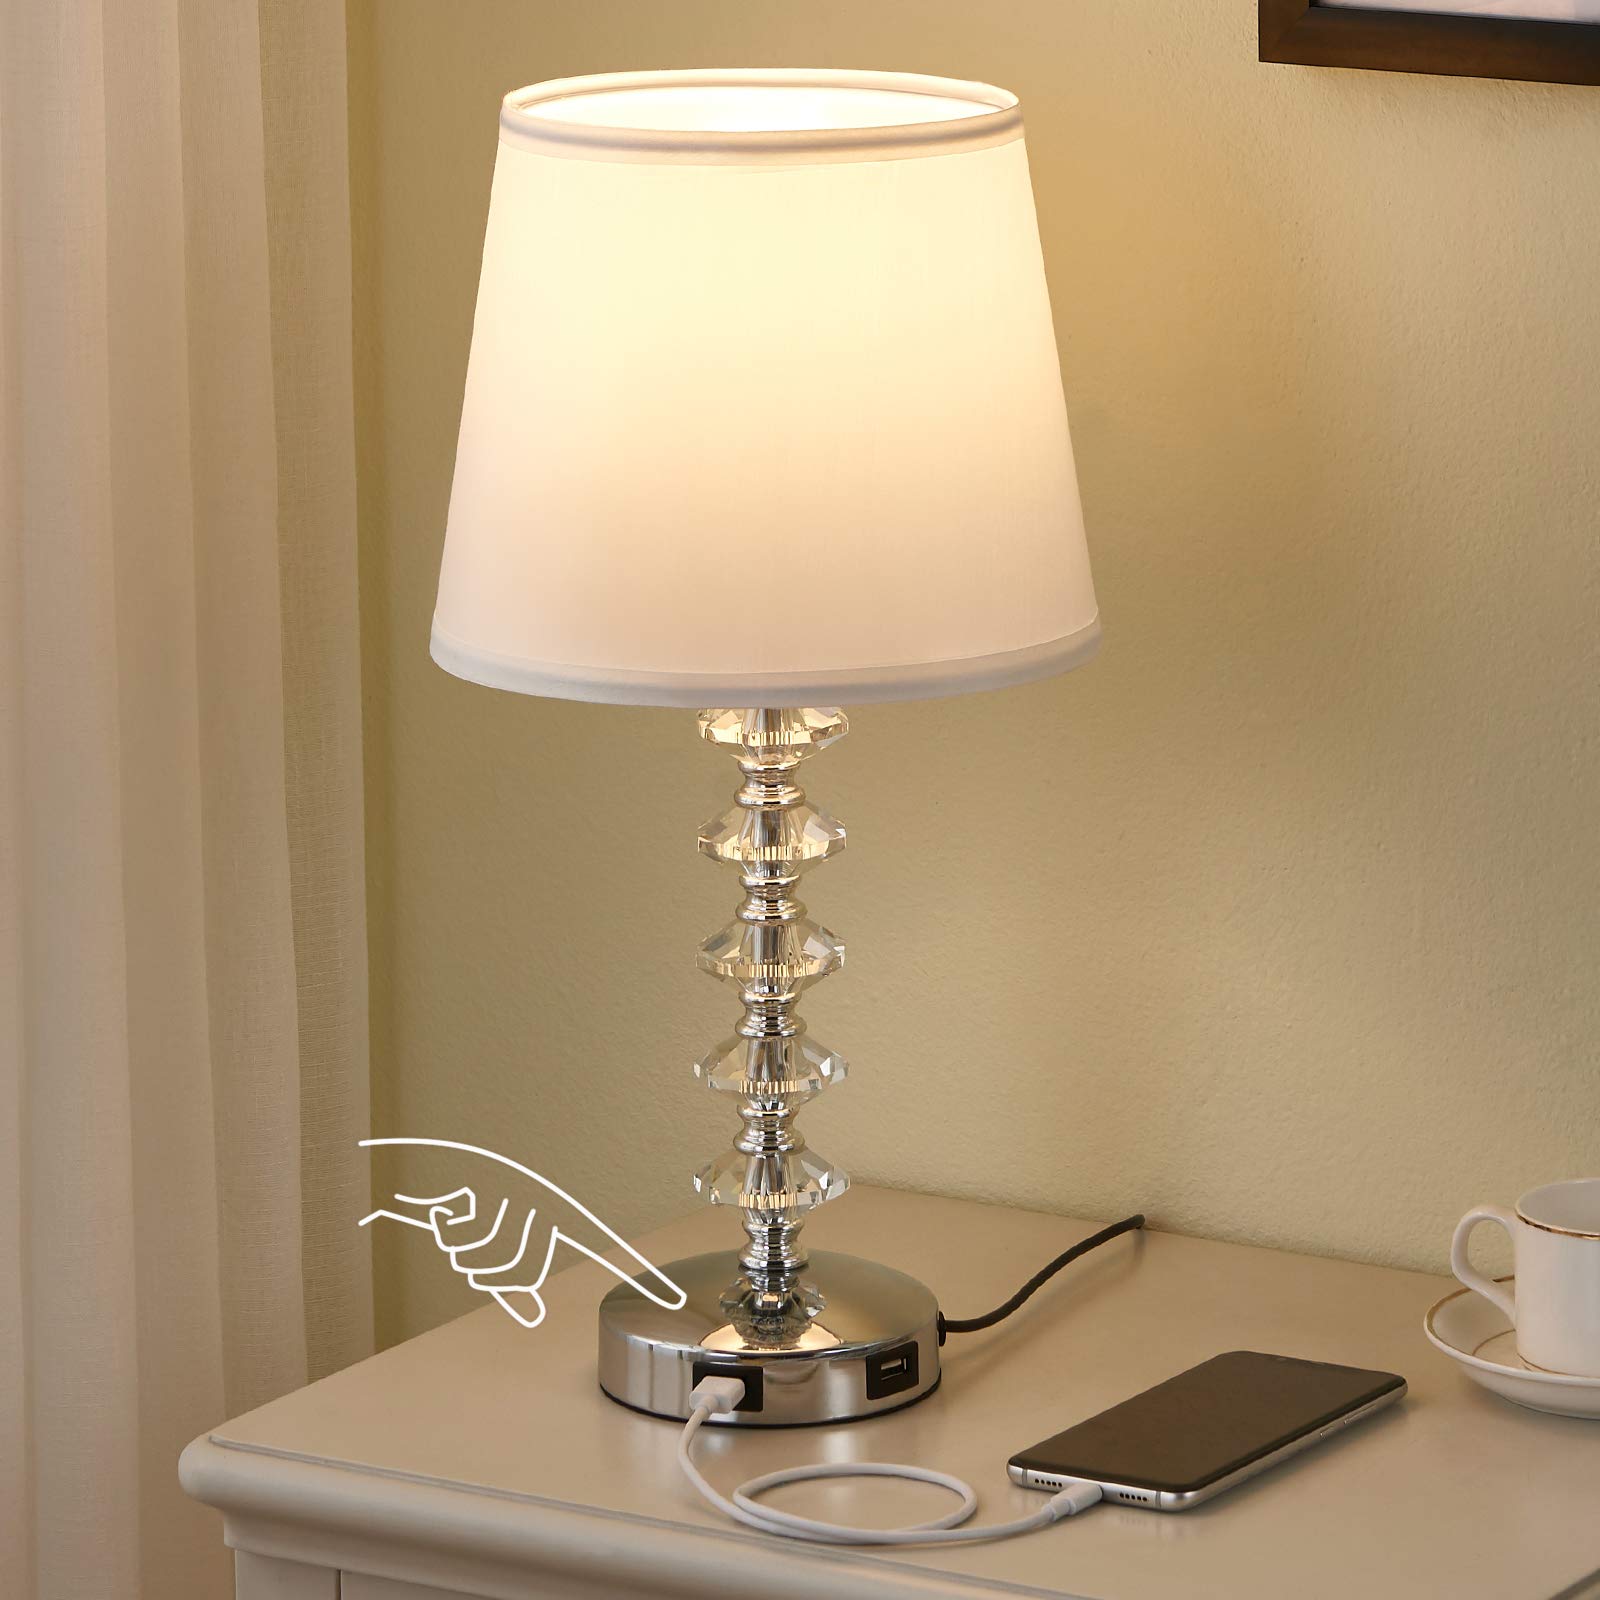 Touch Crystal Lamp for Bedroom with USB Ports, Kakanuo White USB Bedside Table Lamp Nightstand Lamp, 3 Way Dimmable Crystal Touch Lamp for Bedroom,...